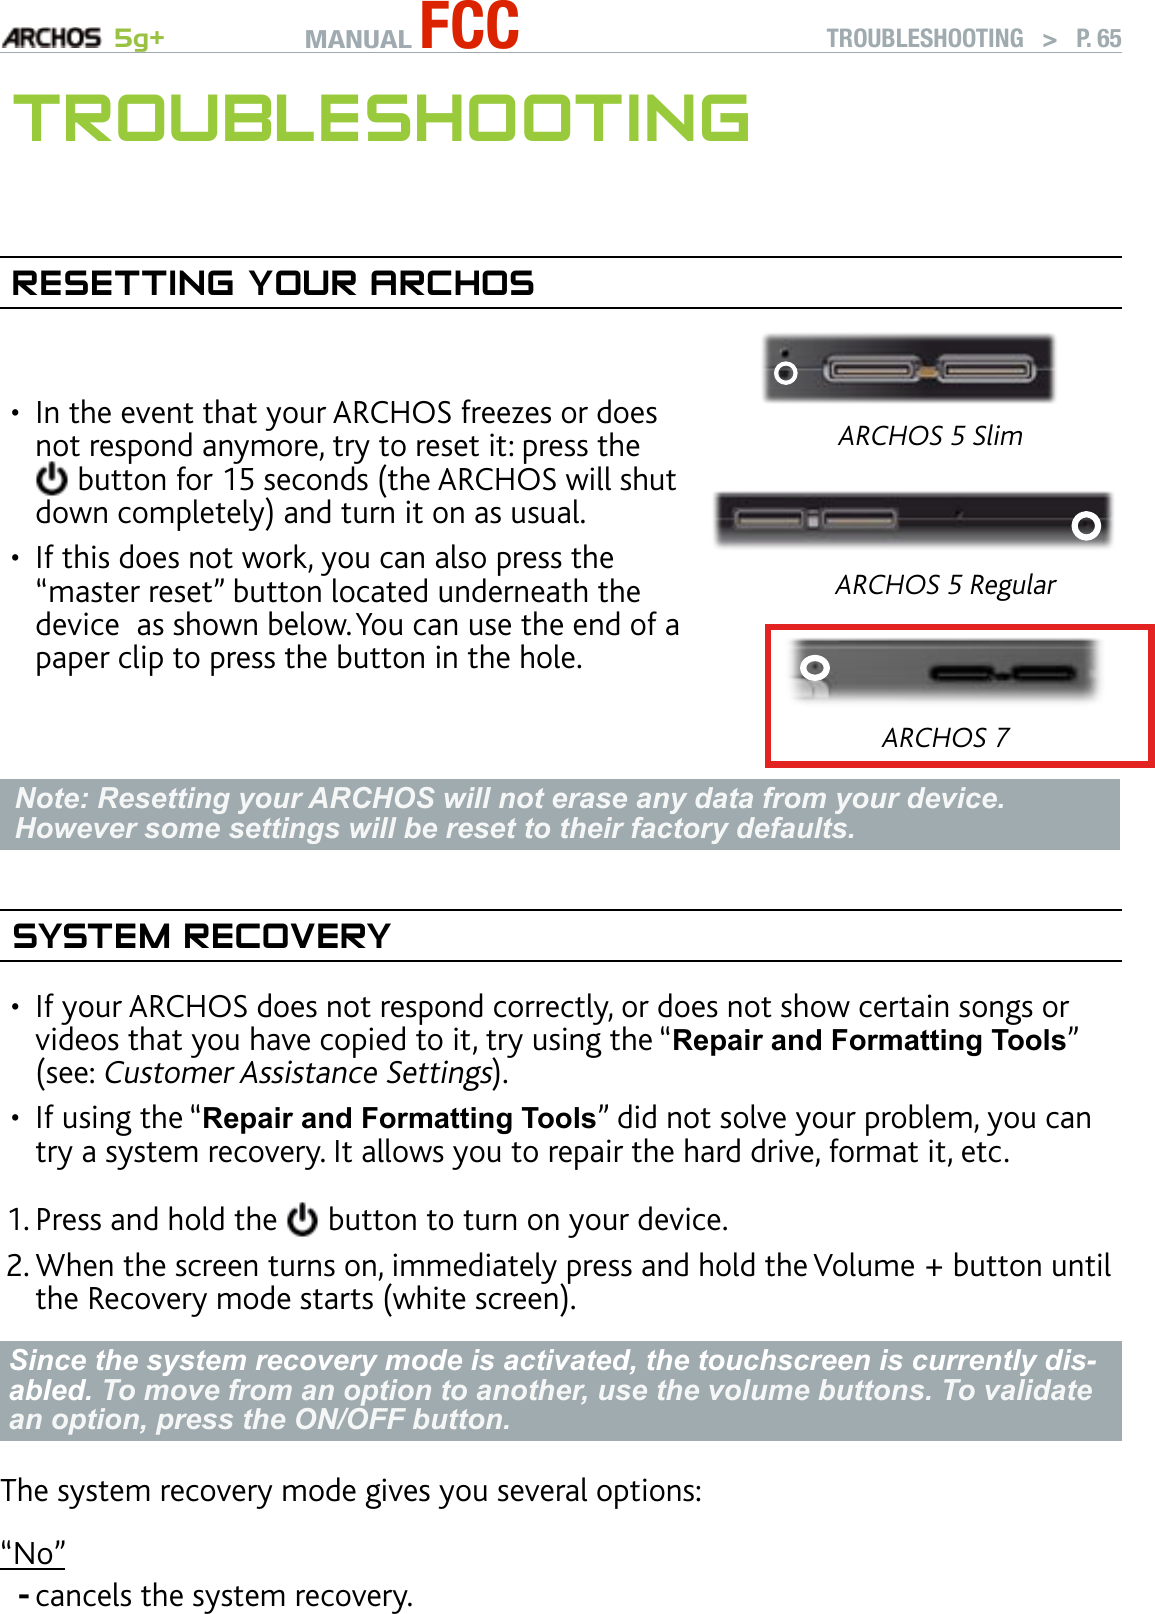 MANUAL FCC 5g+ TROUBLESHOOTING   &gt;   P. 65TrOubleshOOTIngreseTTIng yOur arChOsIn the event that your ARCHOS freezes or does not respond anymore, try to reset it: press the  button for 15 seconds (the ARCHOS will shut down completely) and turn it on as usual.If this does not work, you can also press the “master reset” button located underneath the device  as shown below. You can use the end of a paper clip to press the button in the hole.••ARCHOS 5 SlimARCHOS 5 RegularARCHOS 7Note: Resetting your ARCHOS will not erase any data from your device. However some settings will be reset to their factory defaults.sysTeM reCOVeryIf your ARCHOS does not respond correctly, or does not show certain songs or videos that you have copied to it, try using the “Repair and Formatting Tools” (see: Customer Assistance Settings).If using the “Repair and Formatting Tools” did not solve your problem, you can try a system recovery. It allows you to repair the hard drive, format it, etc.Press and hold the   button to turn on your device.When the screen turns on, immediately press and hold the Volume + button until the Recovery mode starts (white screen).Since the system recovery mode is activated, the touchscreen is currently dis-abled. To move from an option to another, use the volume buttons. To validate an option, press the ON/OFF button.The system recovery mode gives you several options: “No”cancels the system recovery.••1.2.-